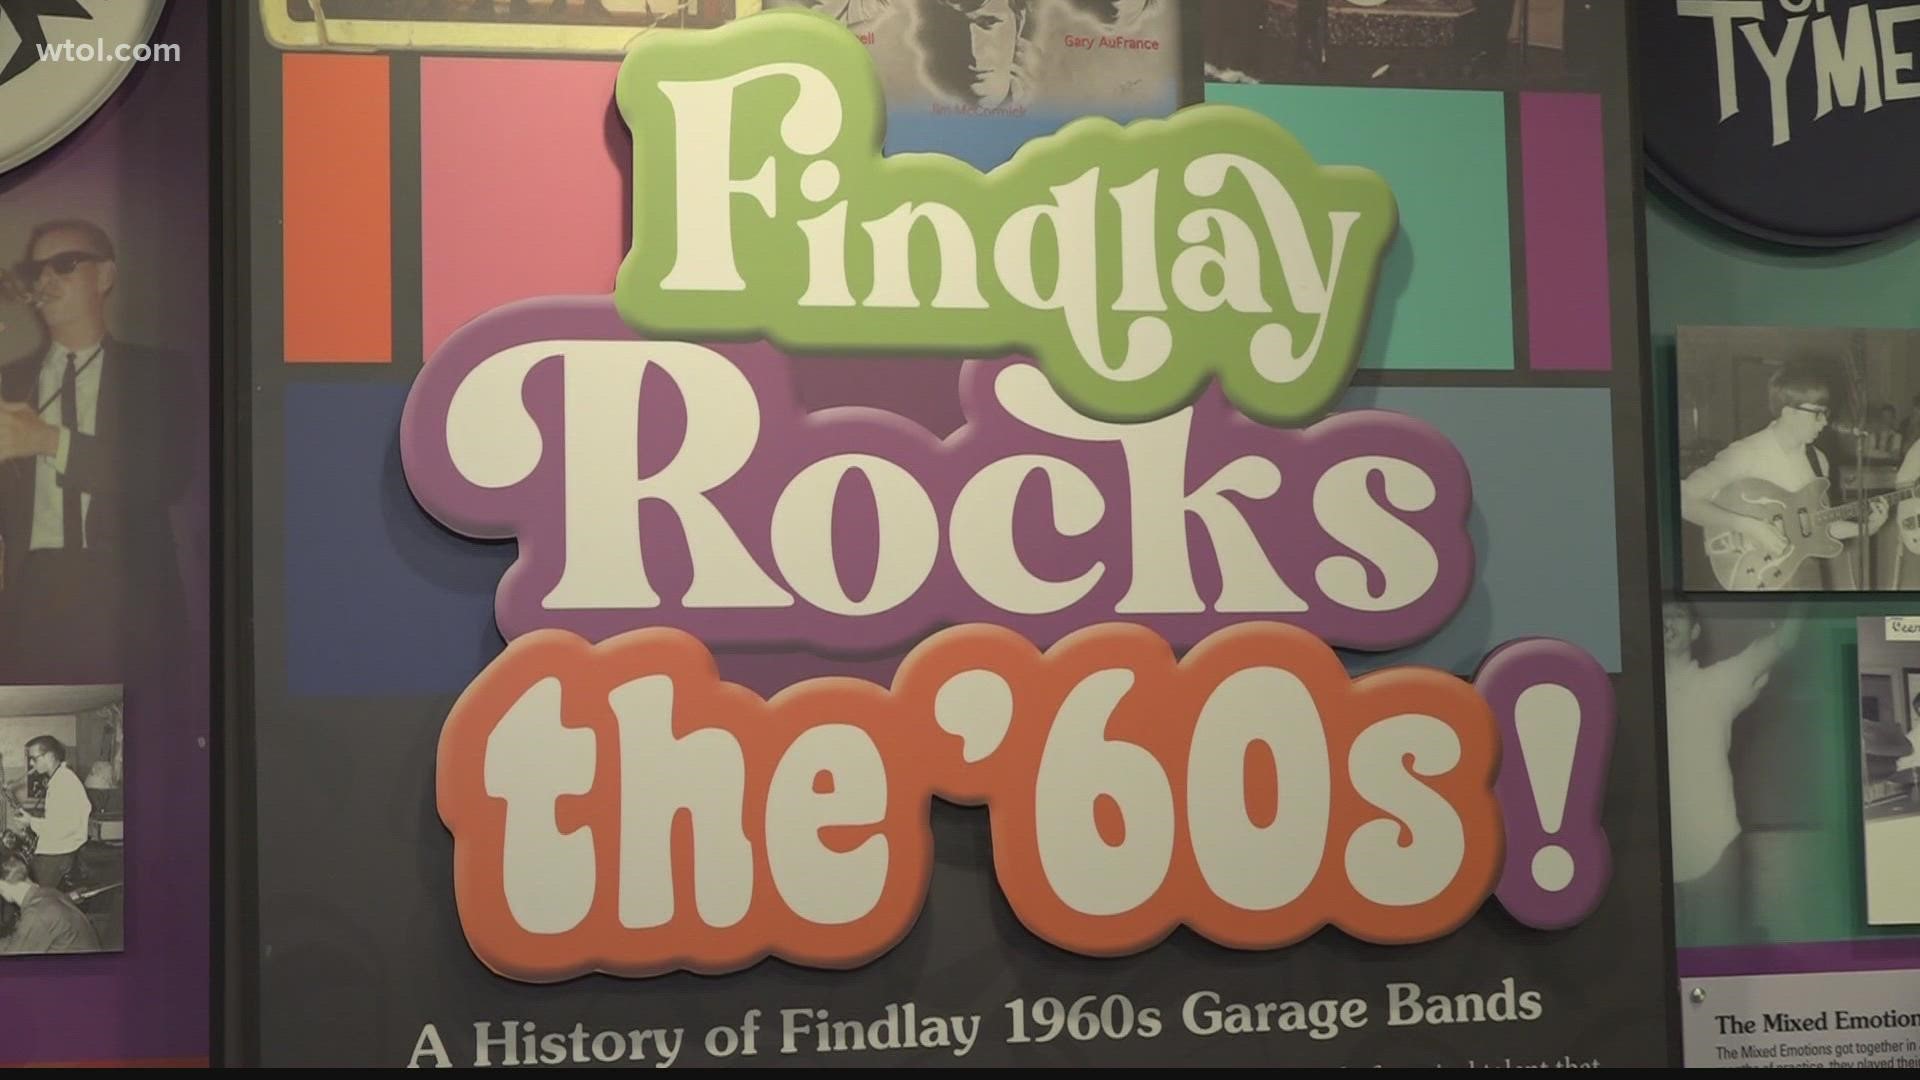 Findlay Rocks the '60s! is on display at the Hancock Historical Museum through the end of the year.